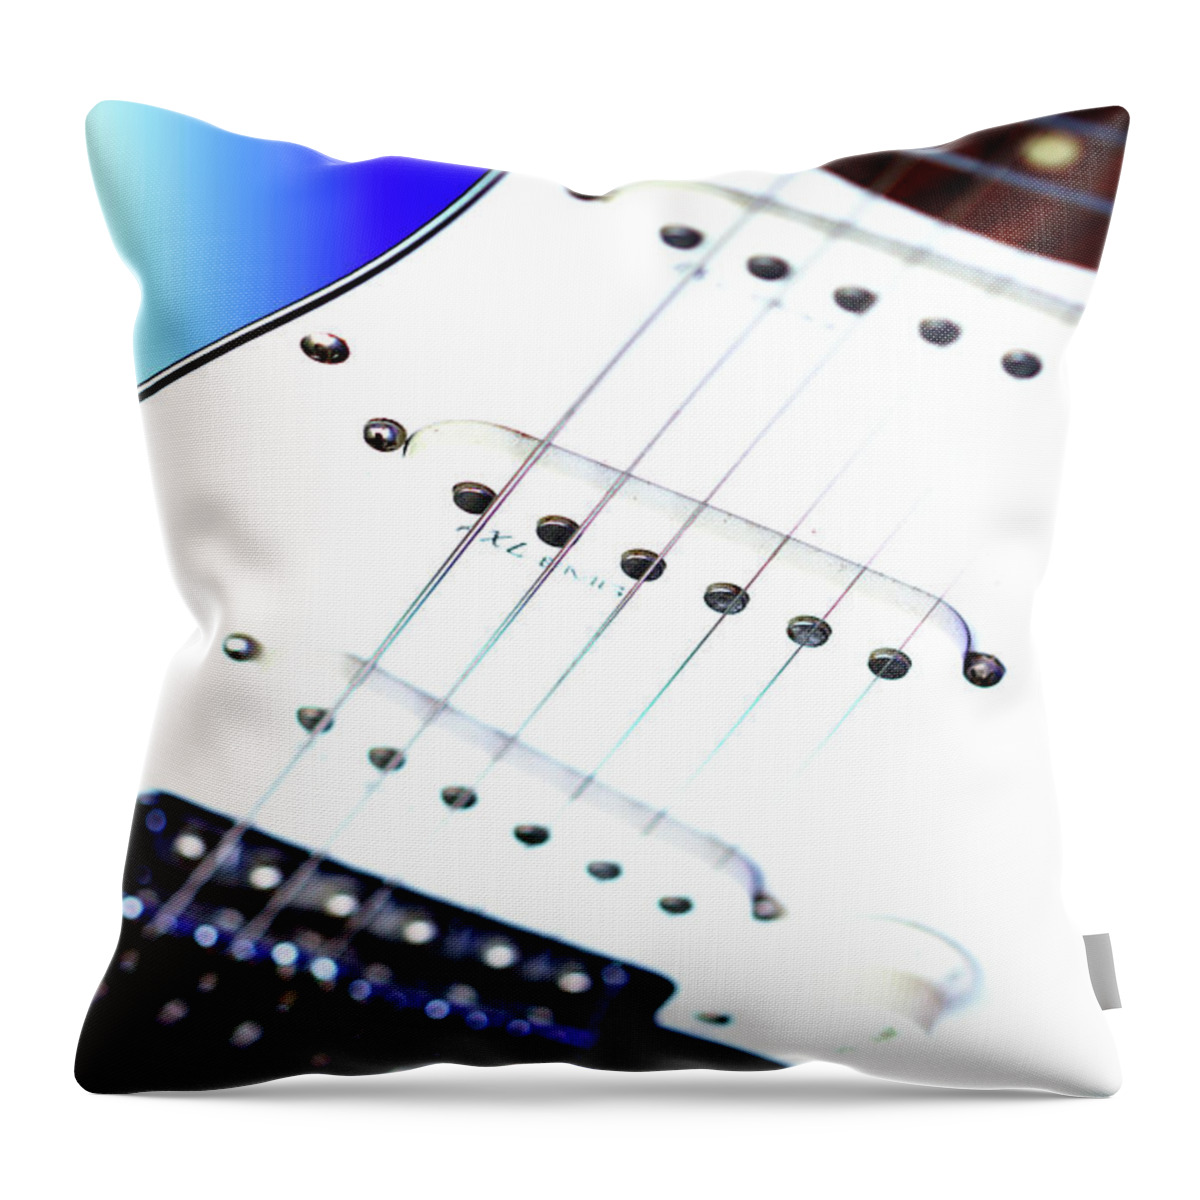 Instrument Throw Pillow featuring the photograph Sweet Rift Maker by Stephen Melia